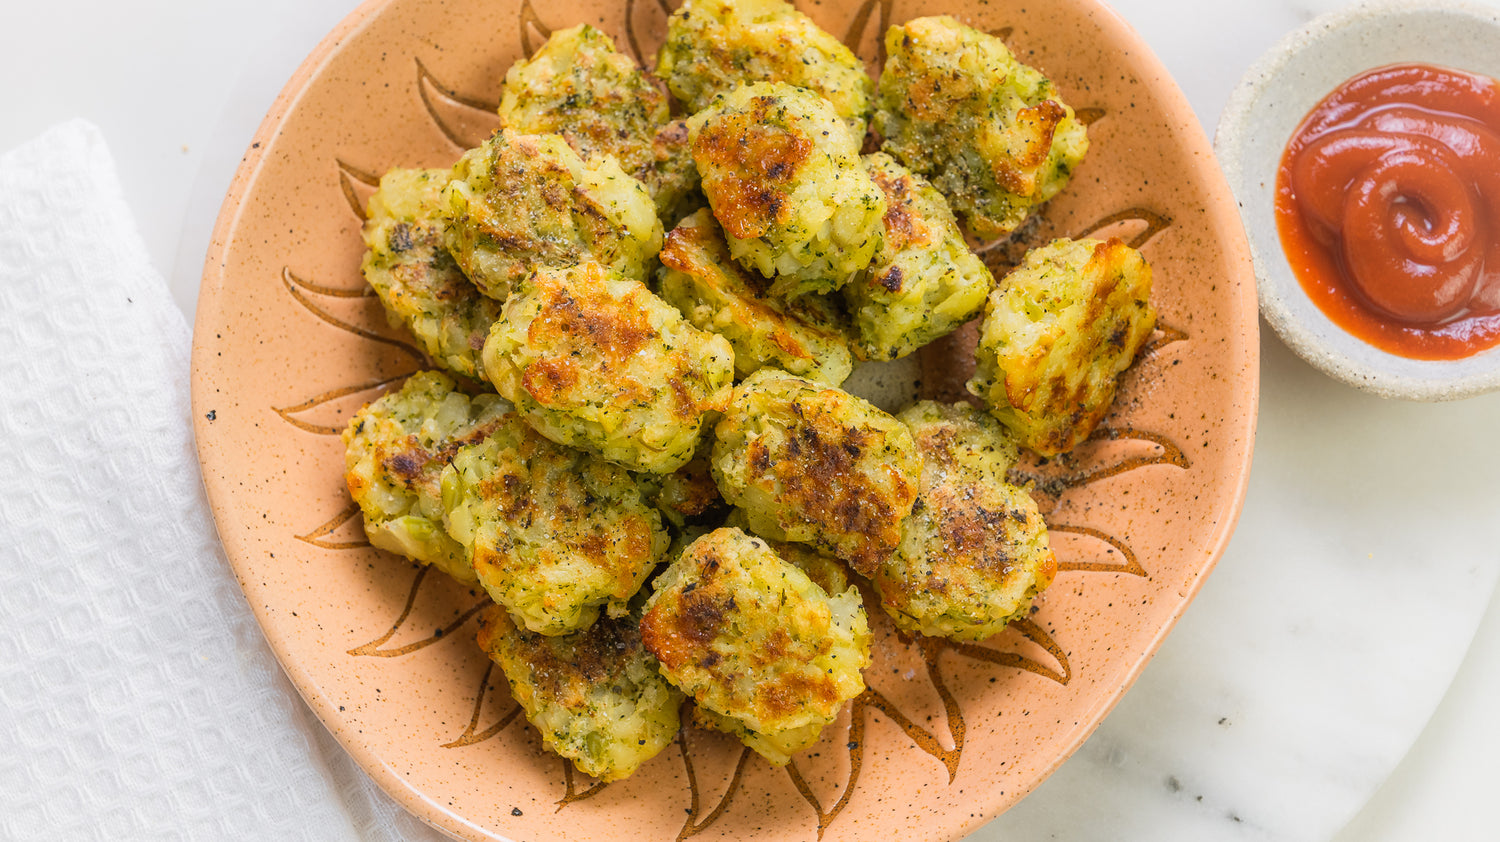 Broccoli and Cheese Tater Tots (Potato Gems)